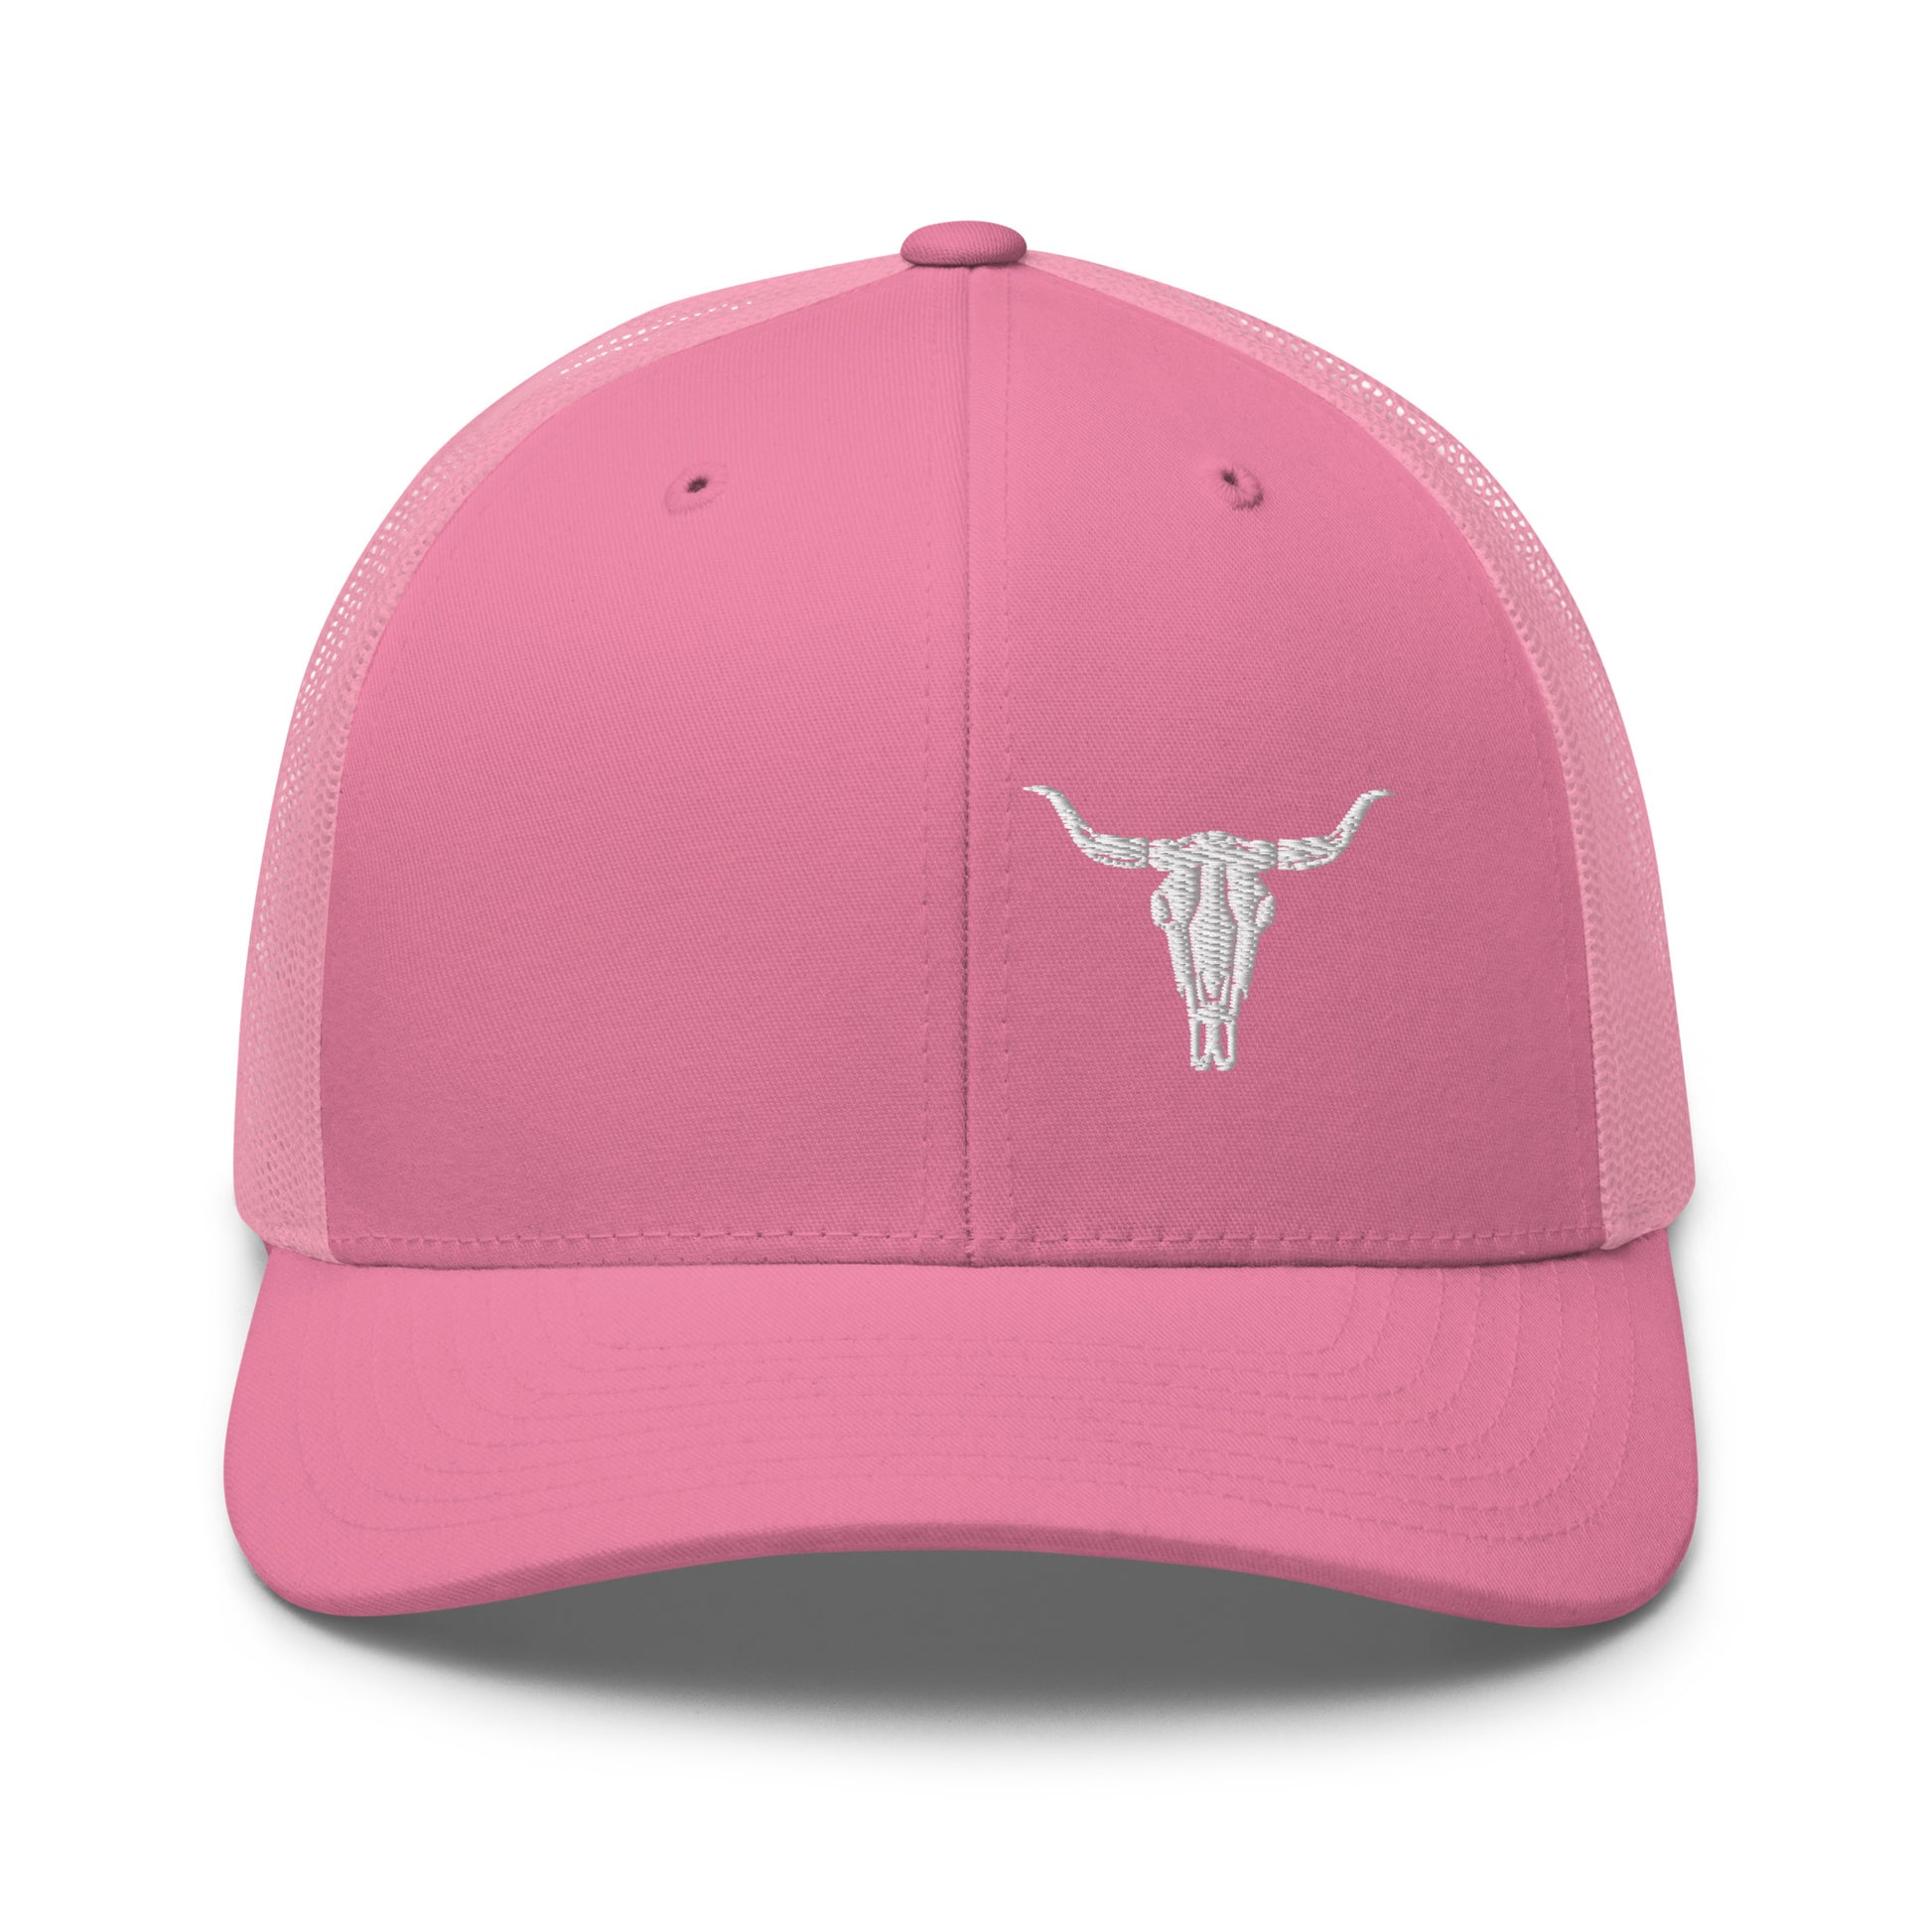 Steer Skull Hat.  A pink Yupoong 6606 with steer skull on the right side panel.